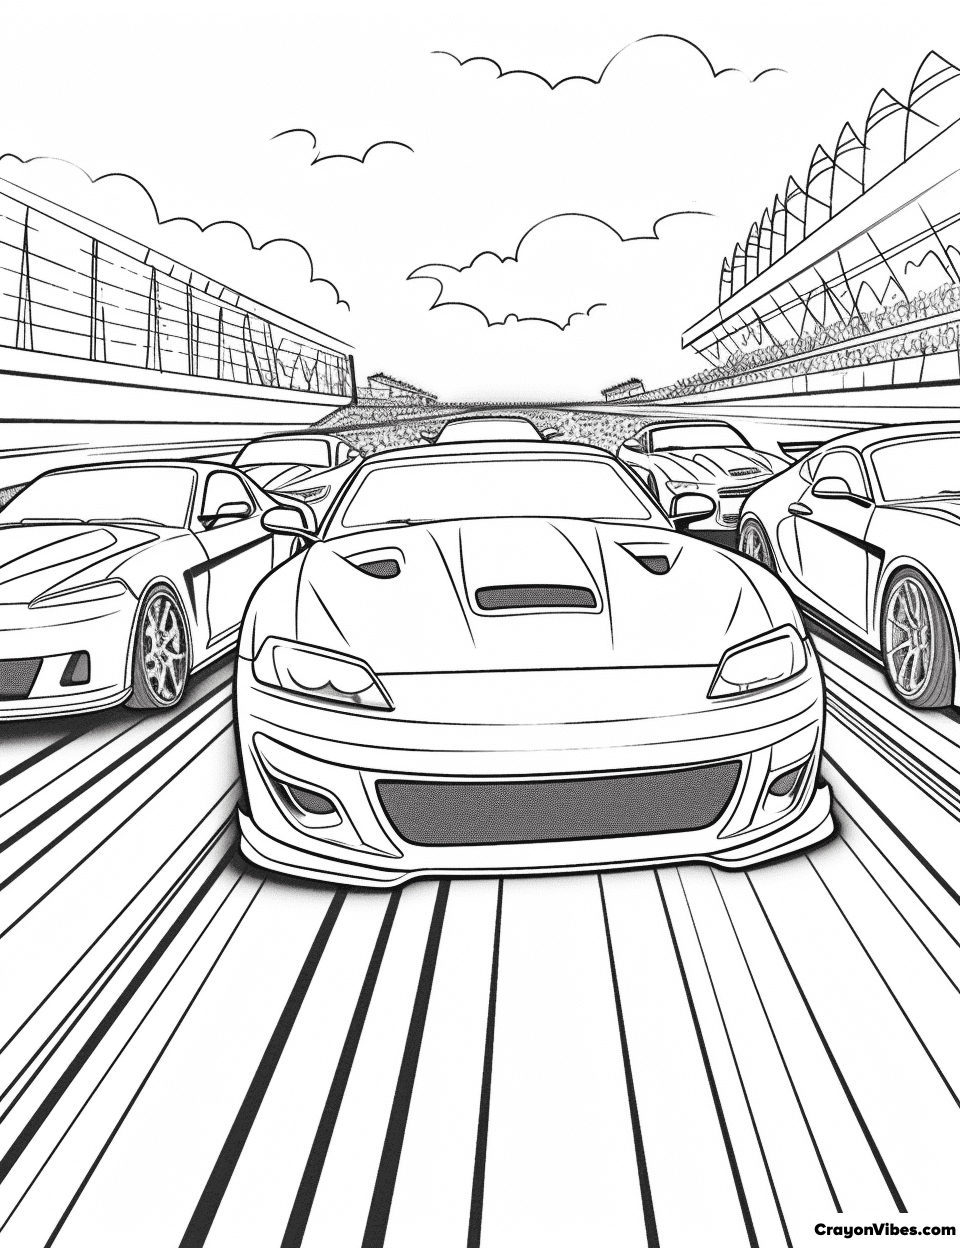 NASCAR Coloring Pages Free Printables for Kids and Adults